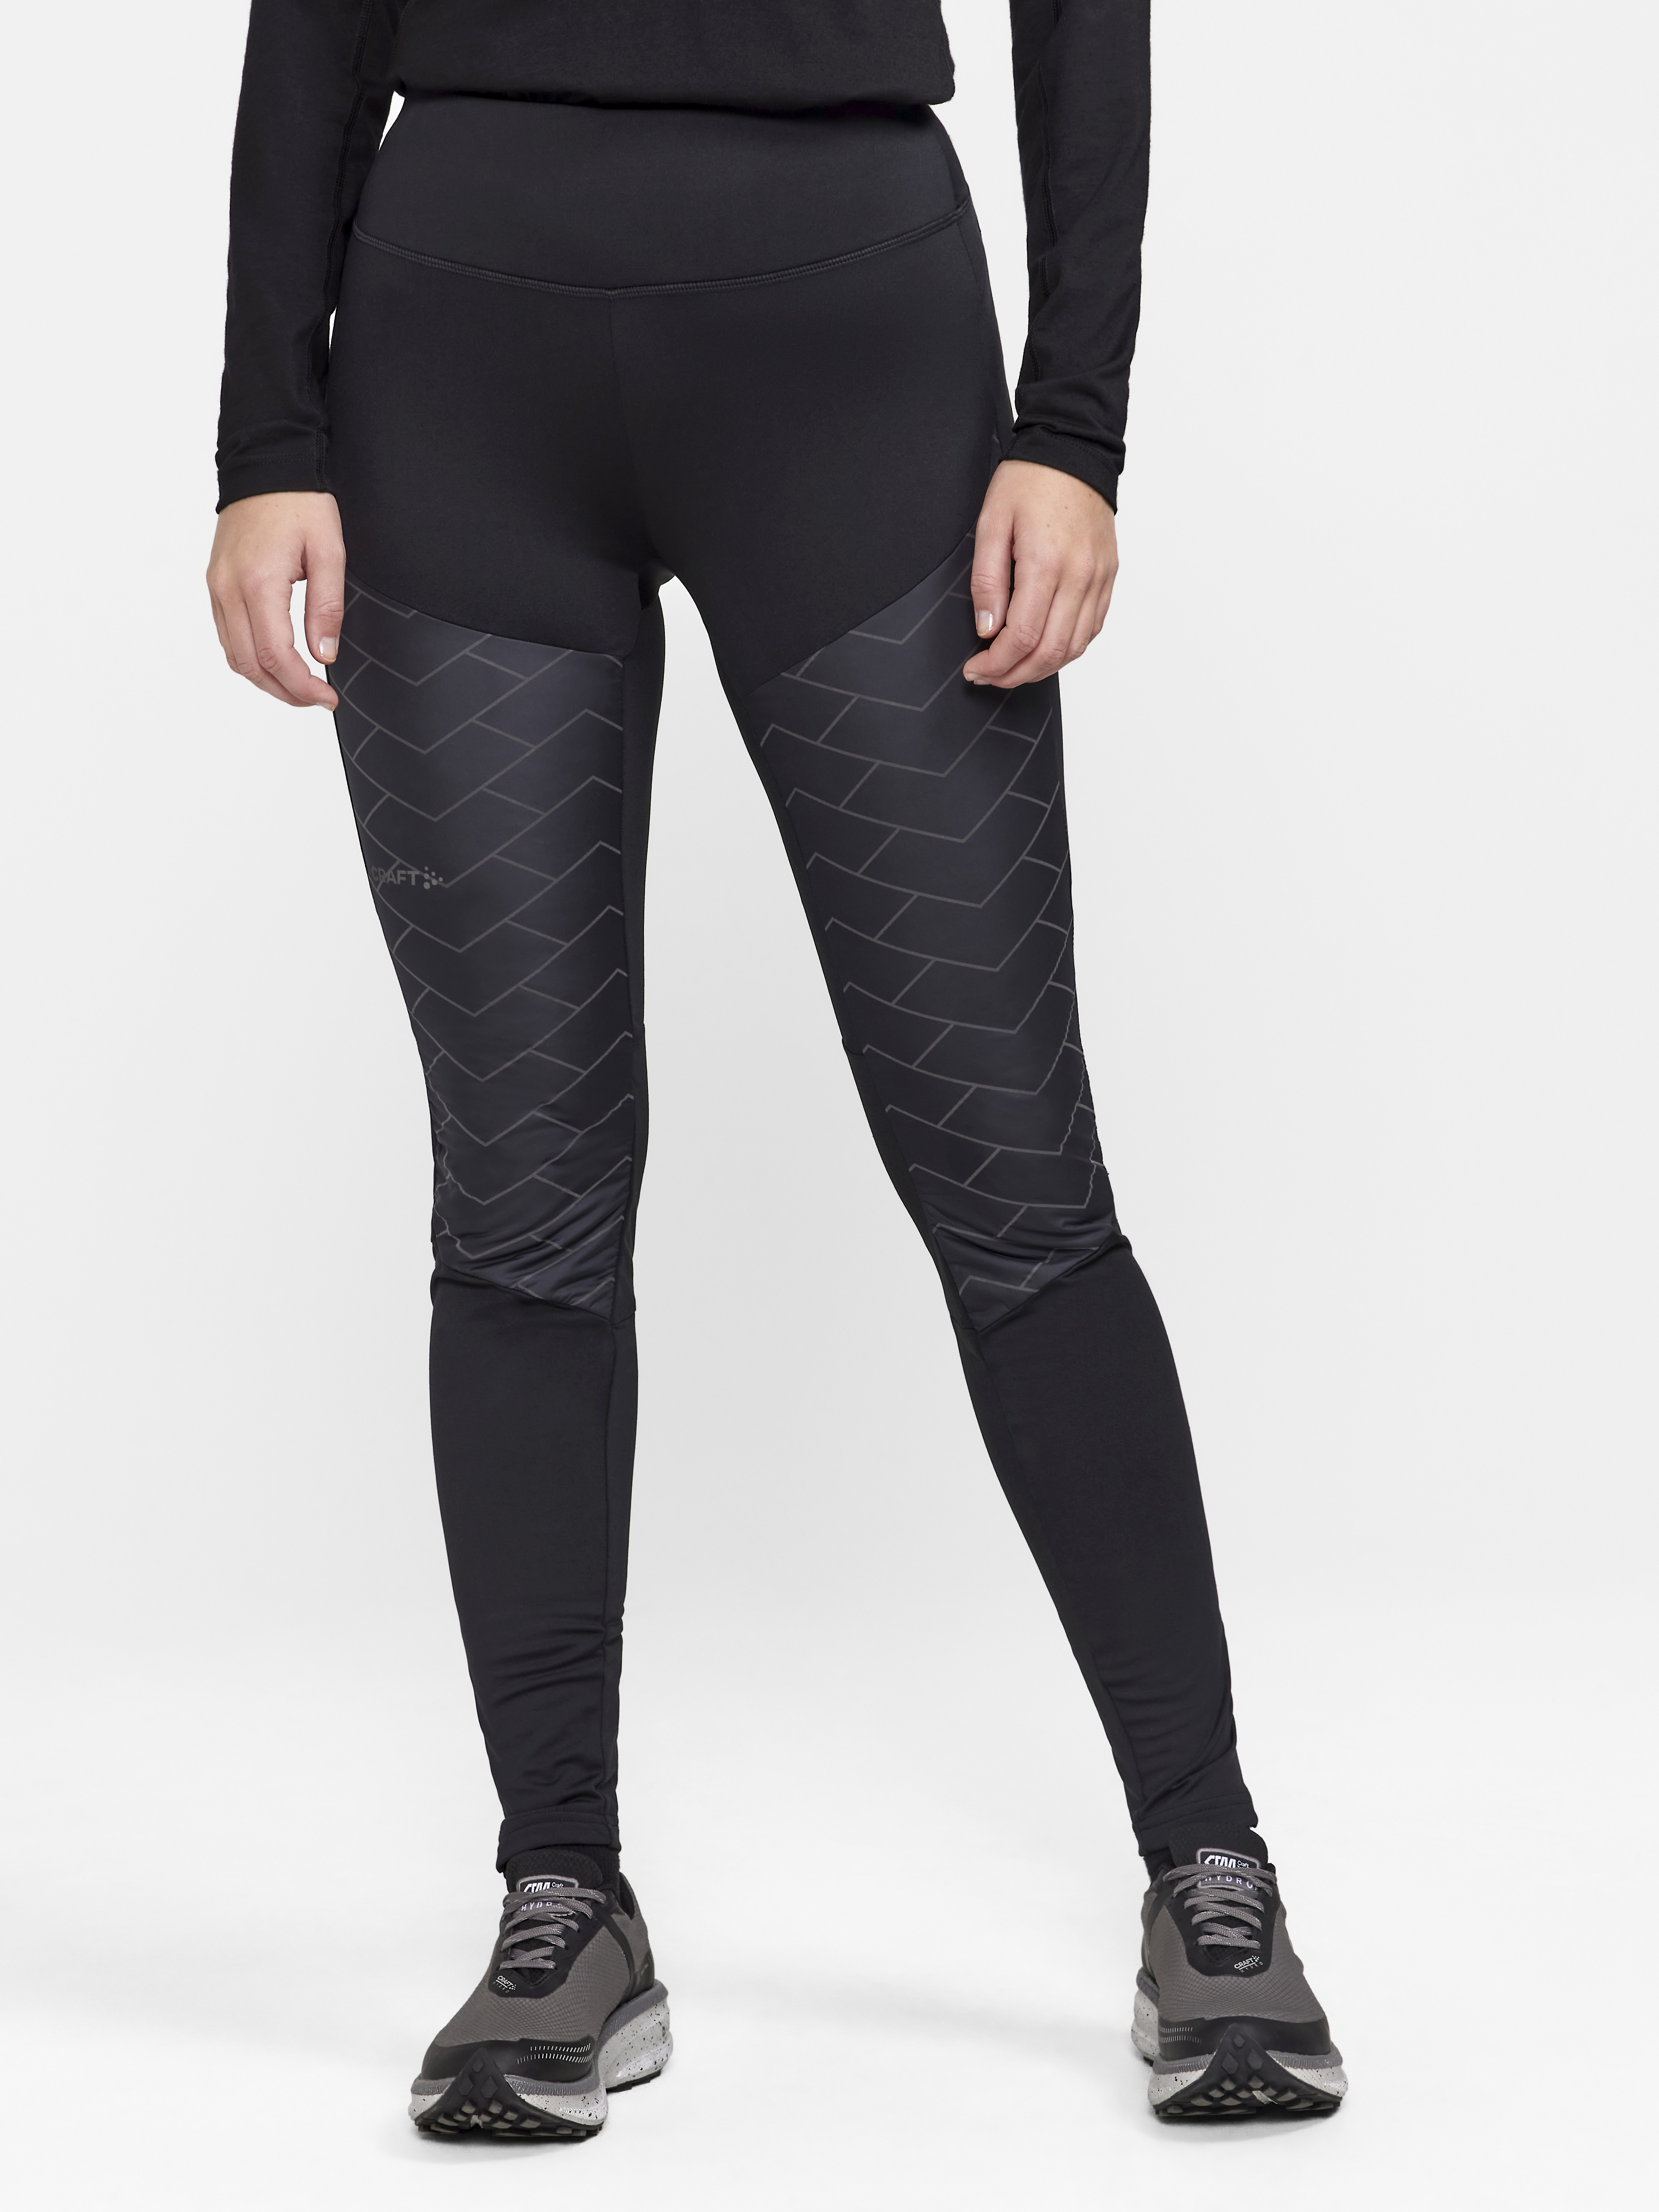 Women's Active Solid Black Buttery Soft Athletic Leggings.  (7306381)